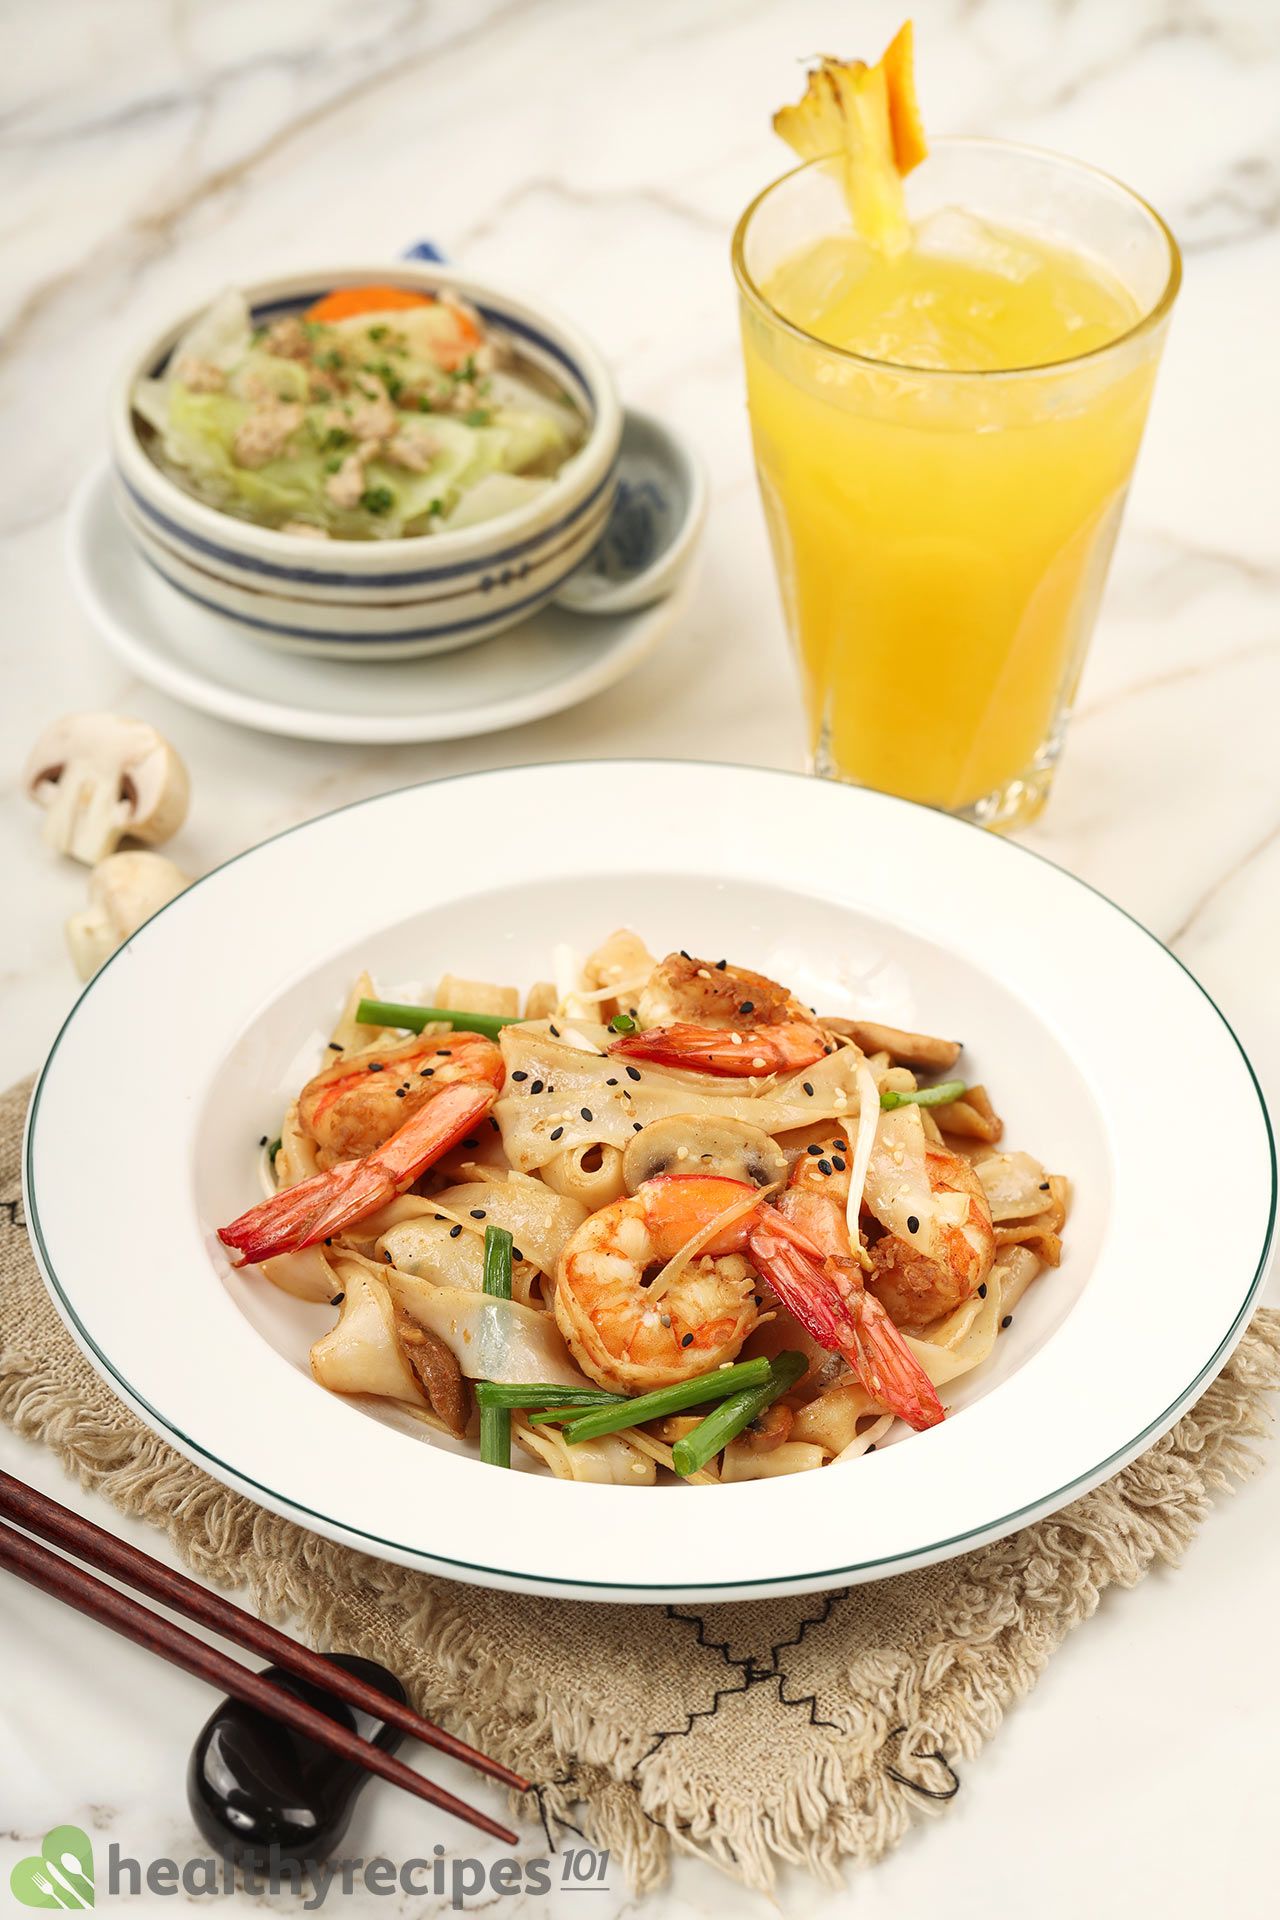 What to Serve With Shrimp Chow Fun